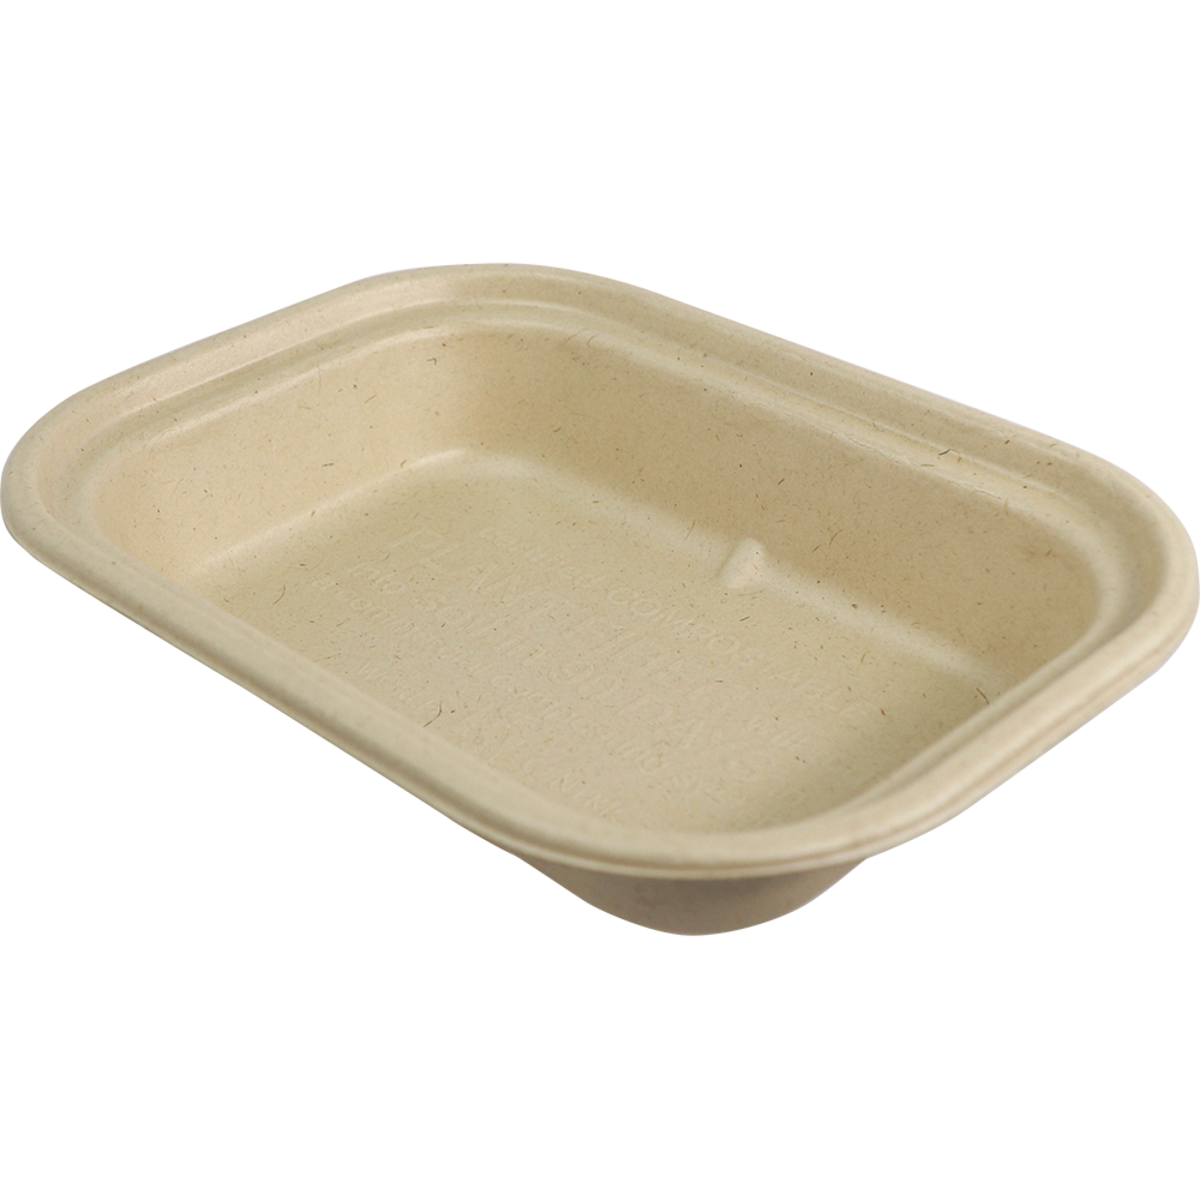 17 oz Fiber To Go Box Container | 8" x 6" x 1.5" | Compostable | (Pack of 50)